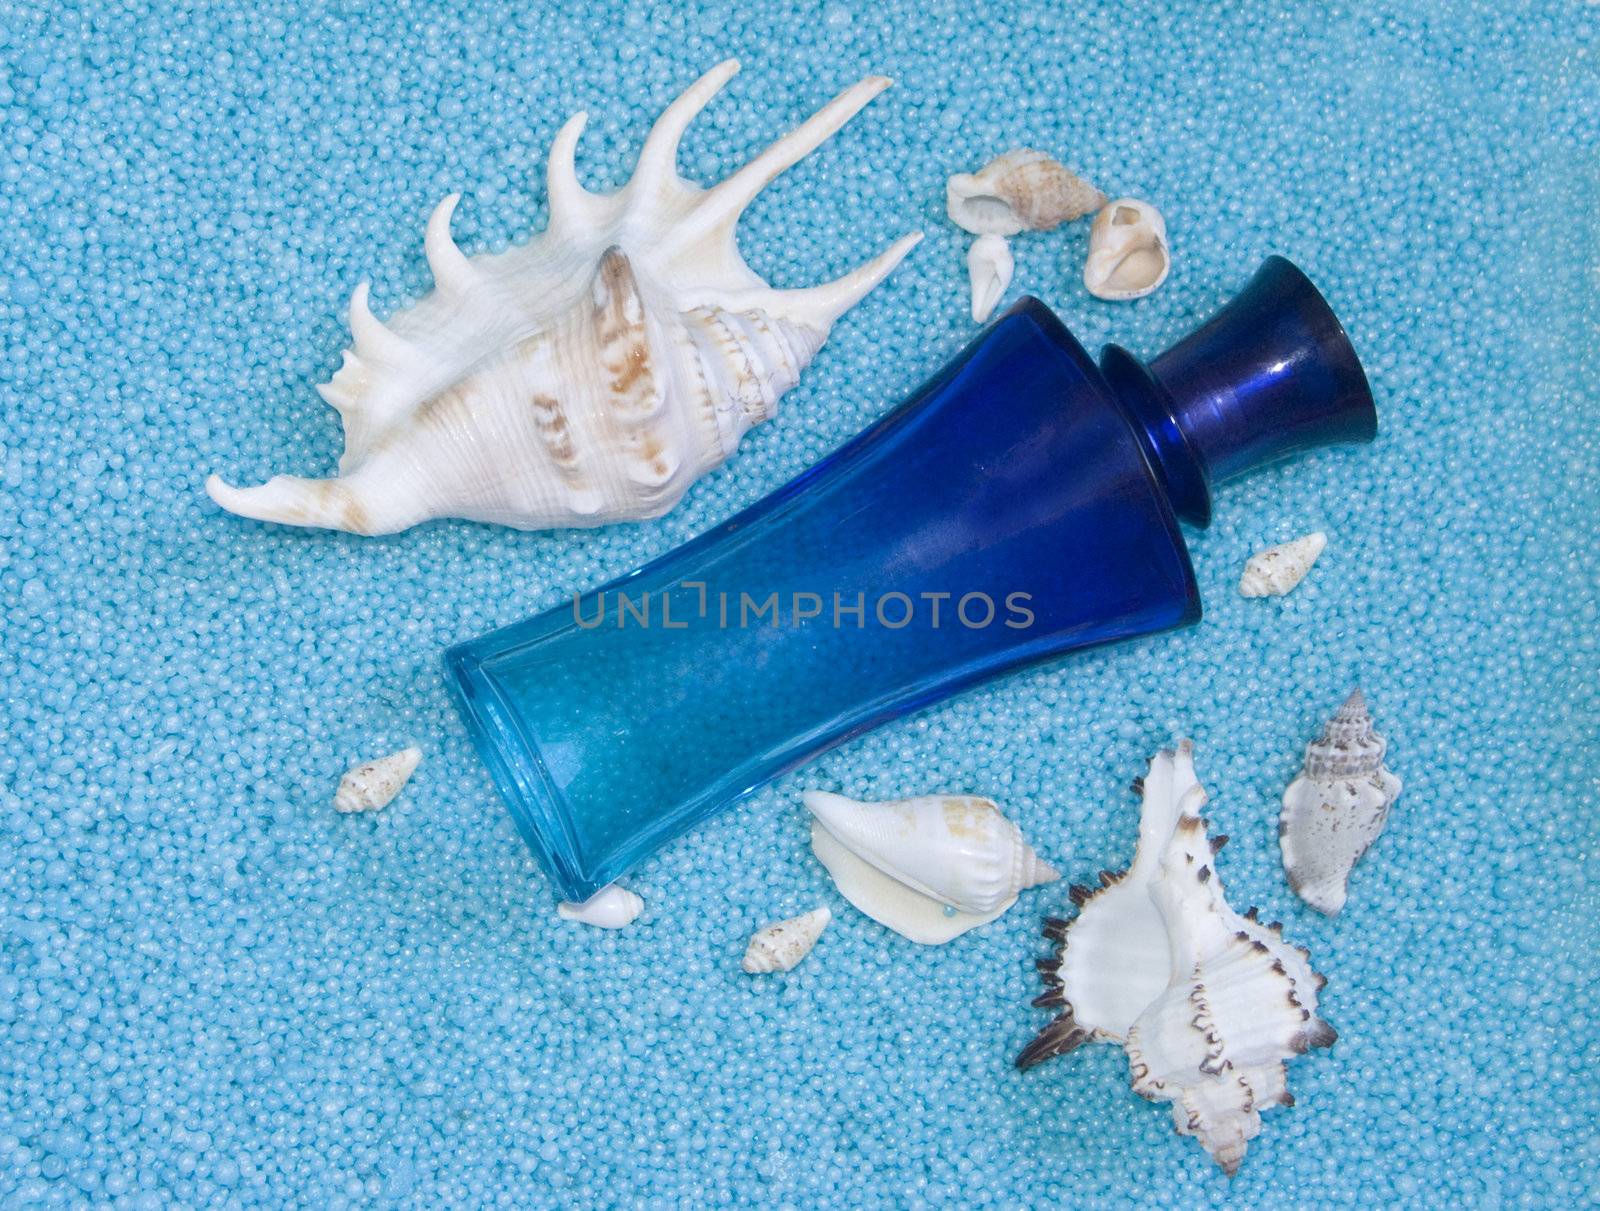 The image of a bottle of perfume and cockleshells on a dark blue background